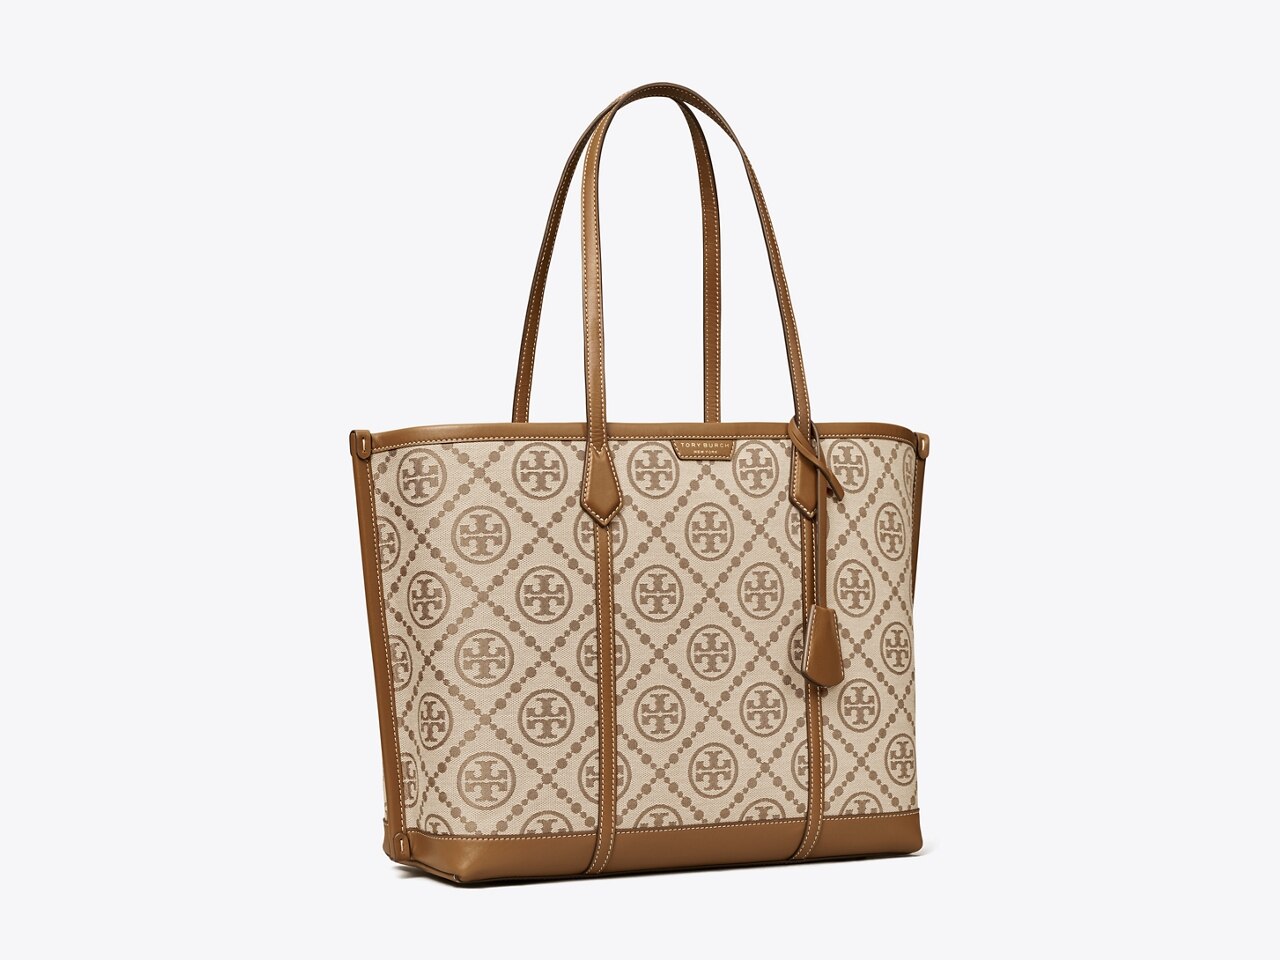 Tory Burch 83313 PERRY T MONOGRAM SMALL TRIPLE-COMPARTMENT TOTE IN HAZEL  371 